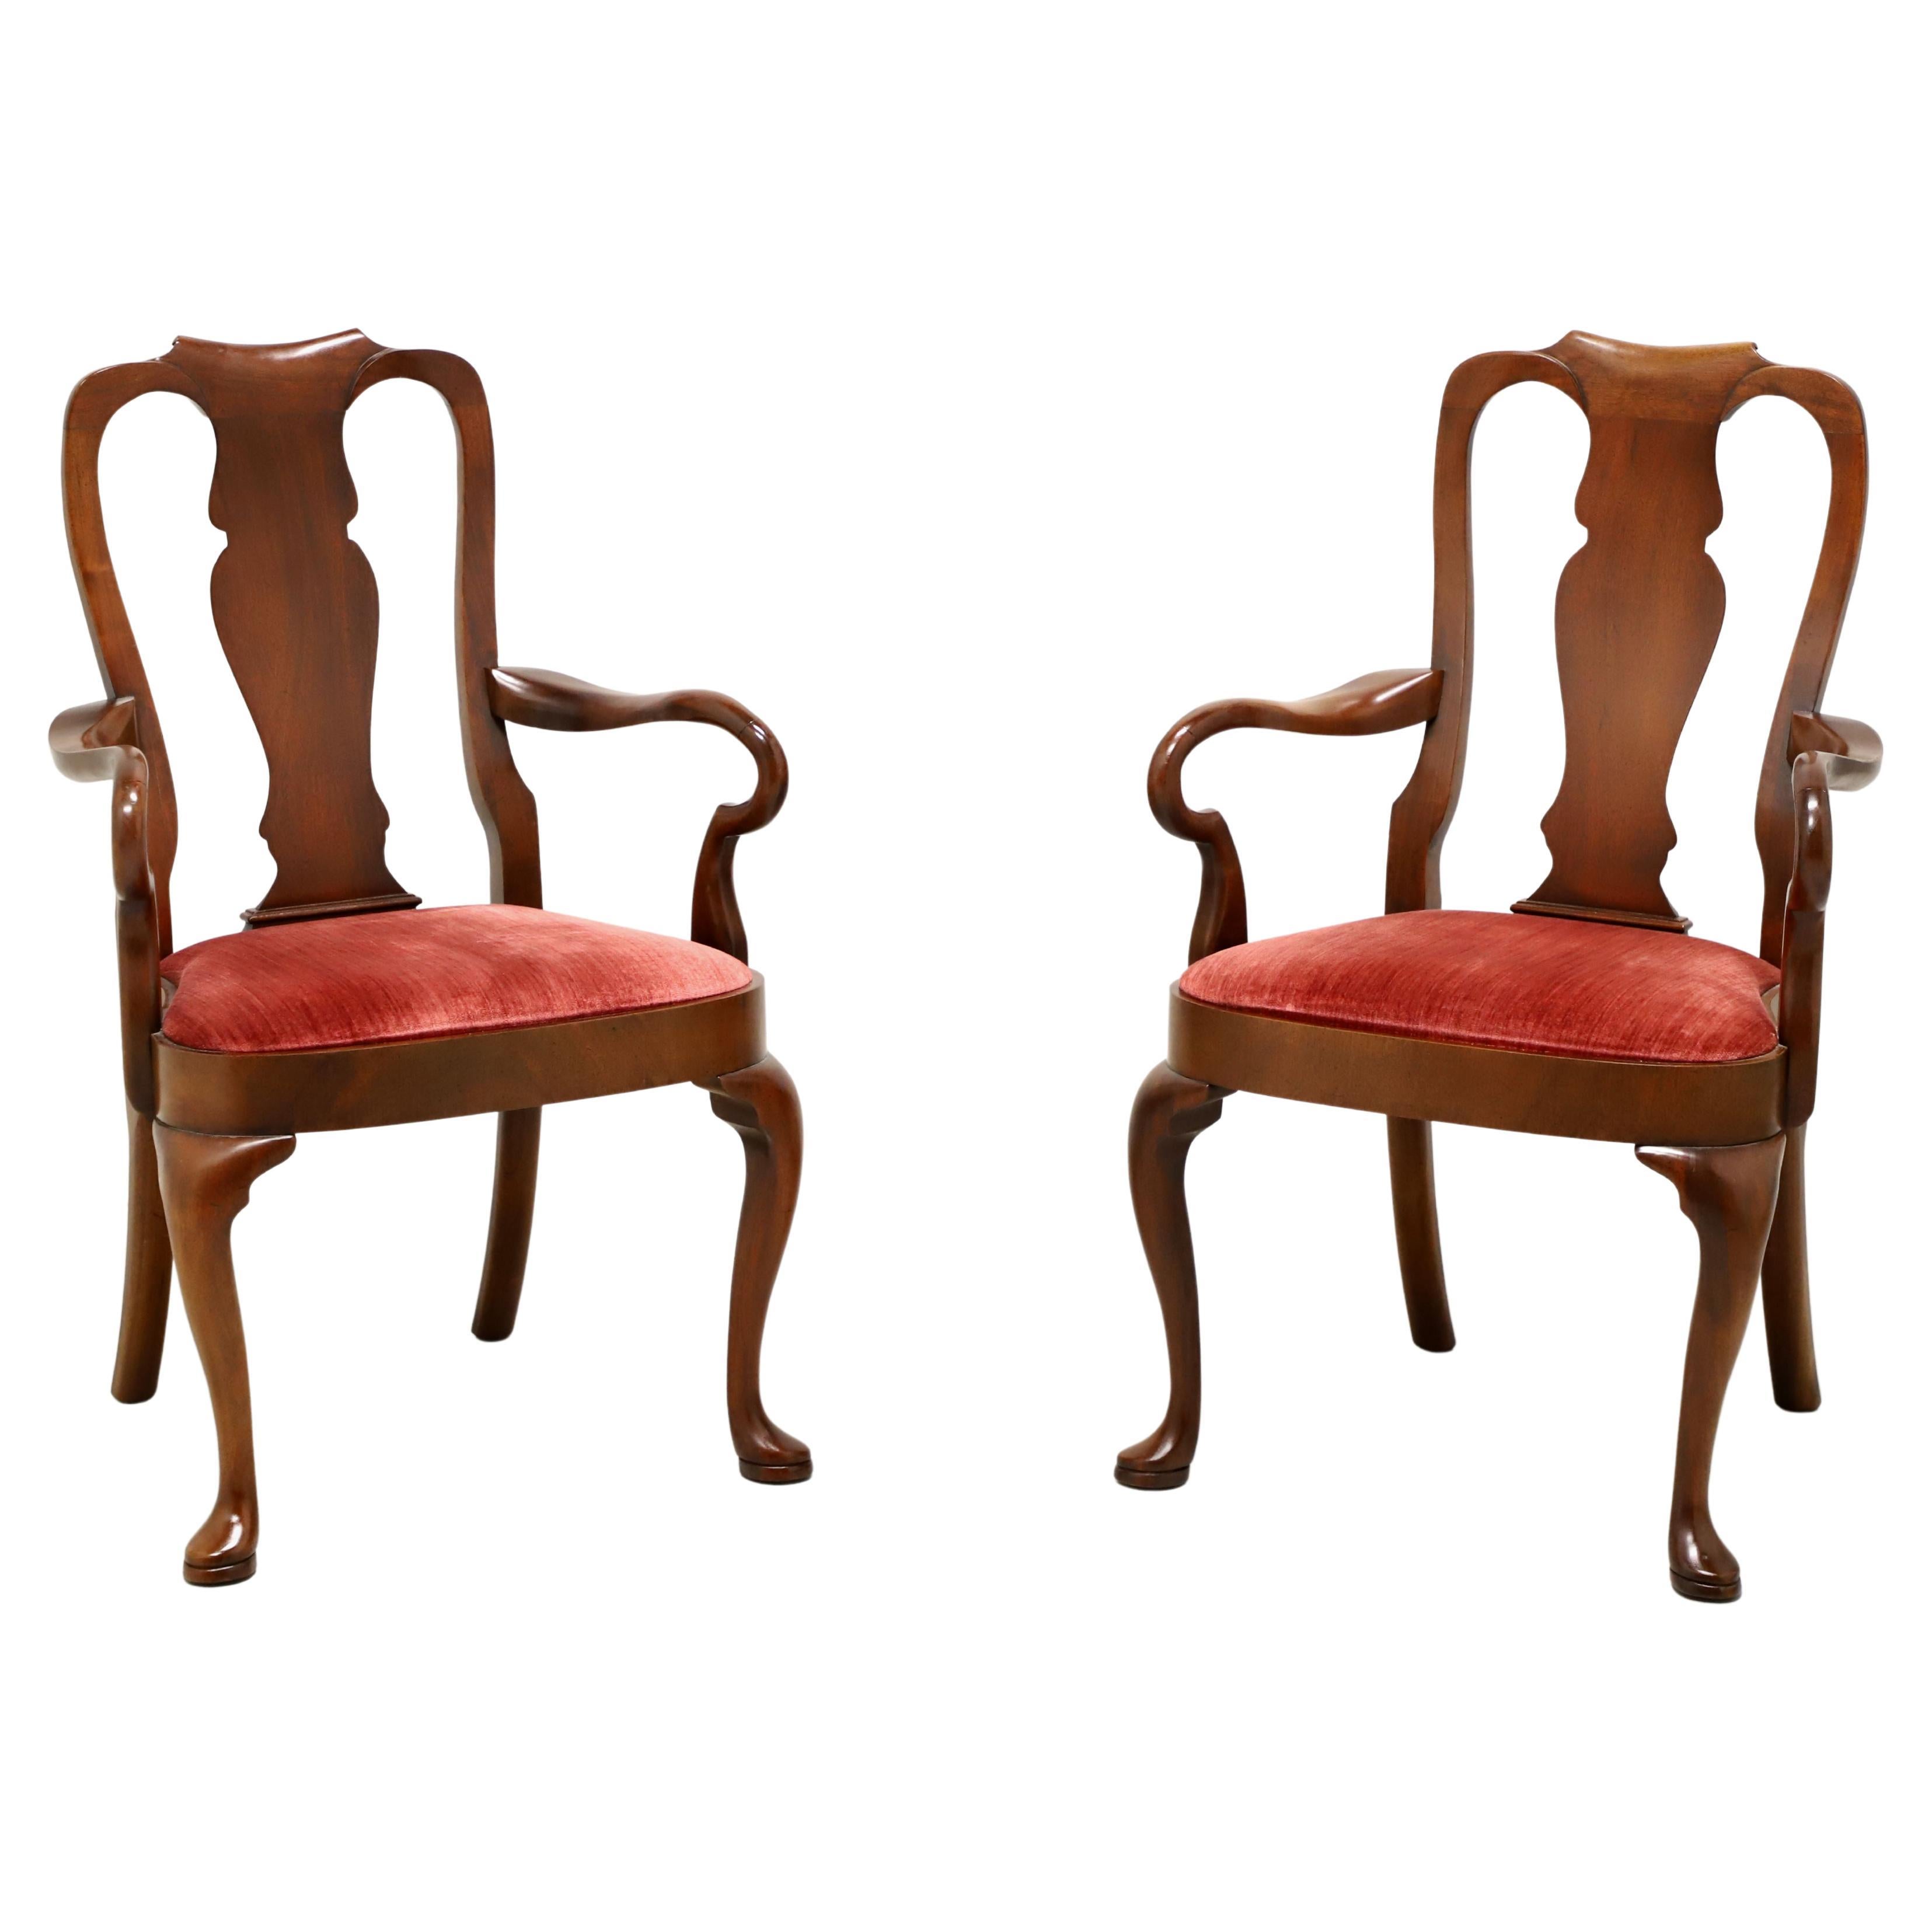 HICKORY CHAIR Mahogany Queen Anne Dining Armchairs - Pair